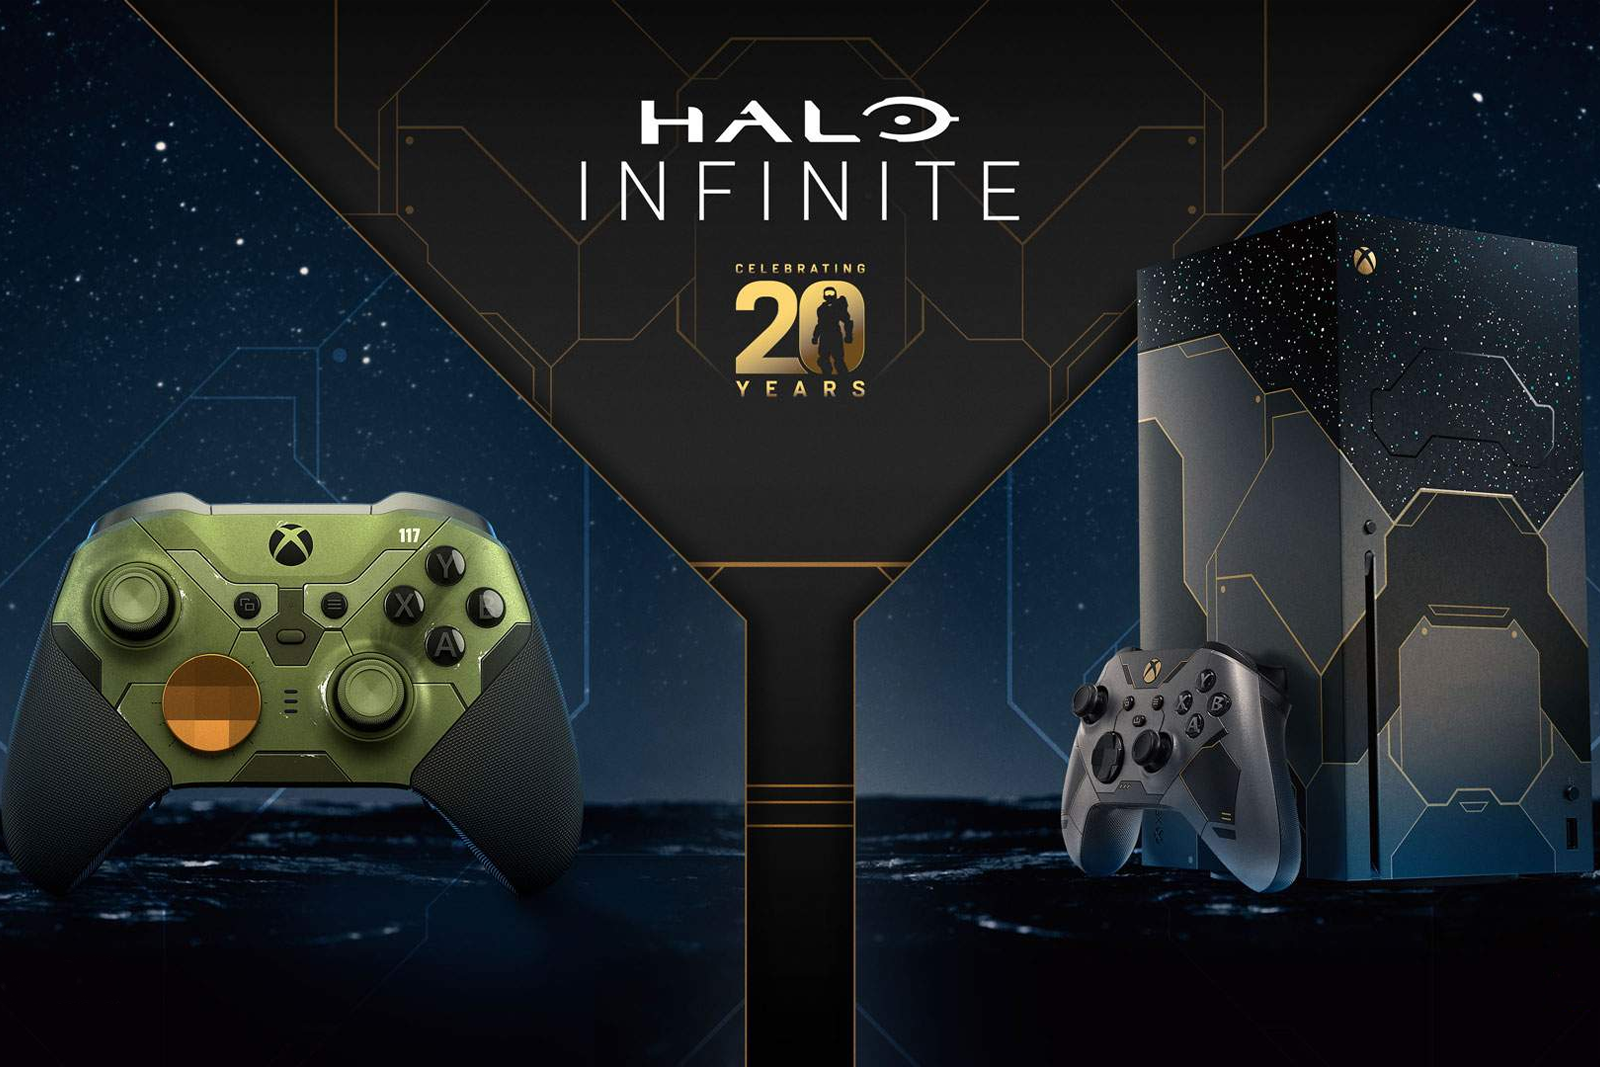 Halo Infinite gets special edition controllers and Xbox Series X to go with its release date photo 1